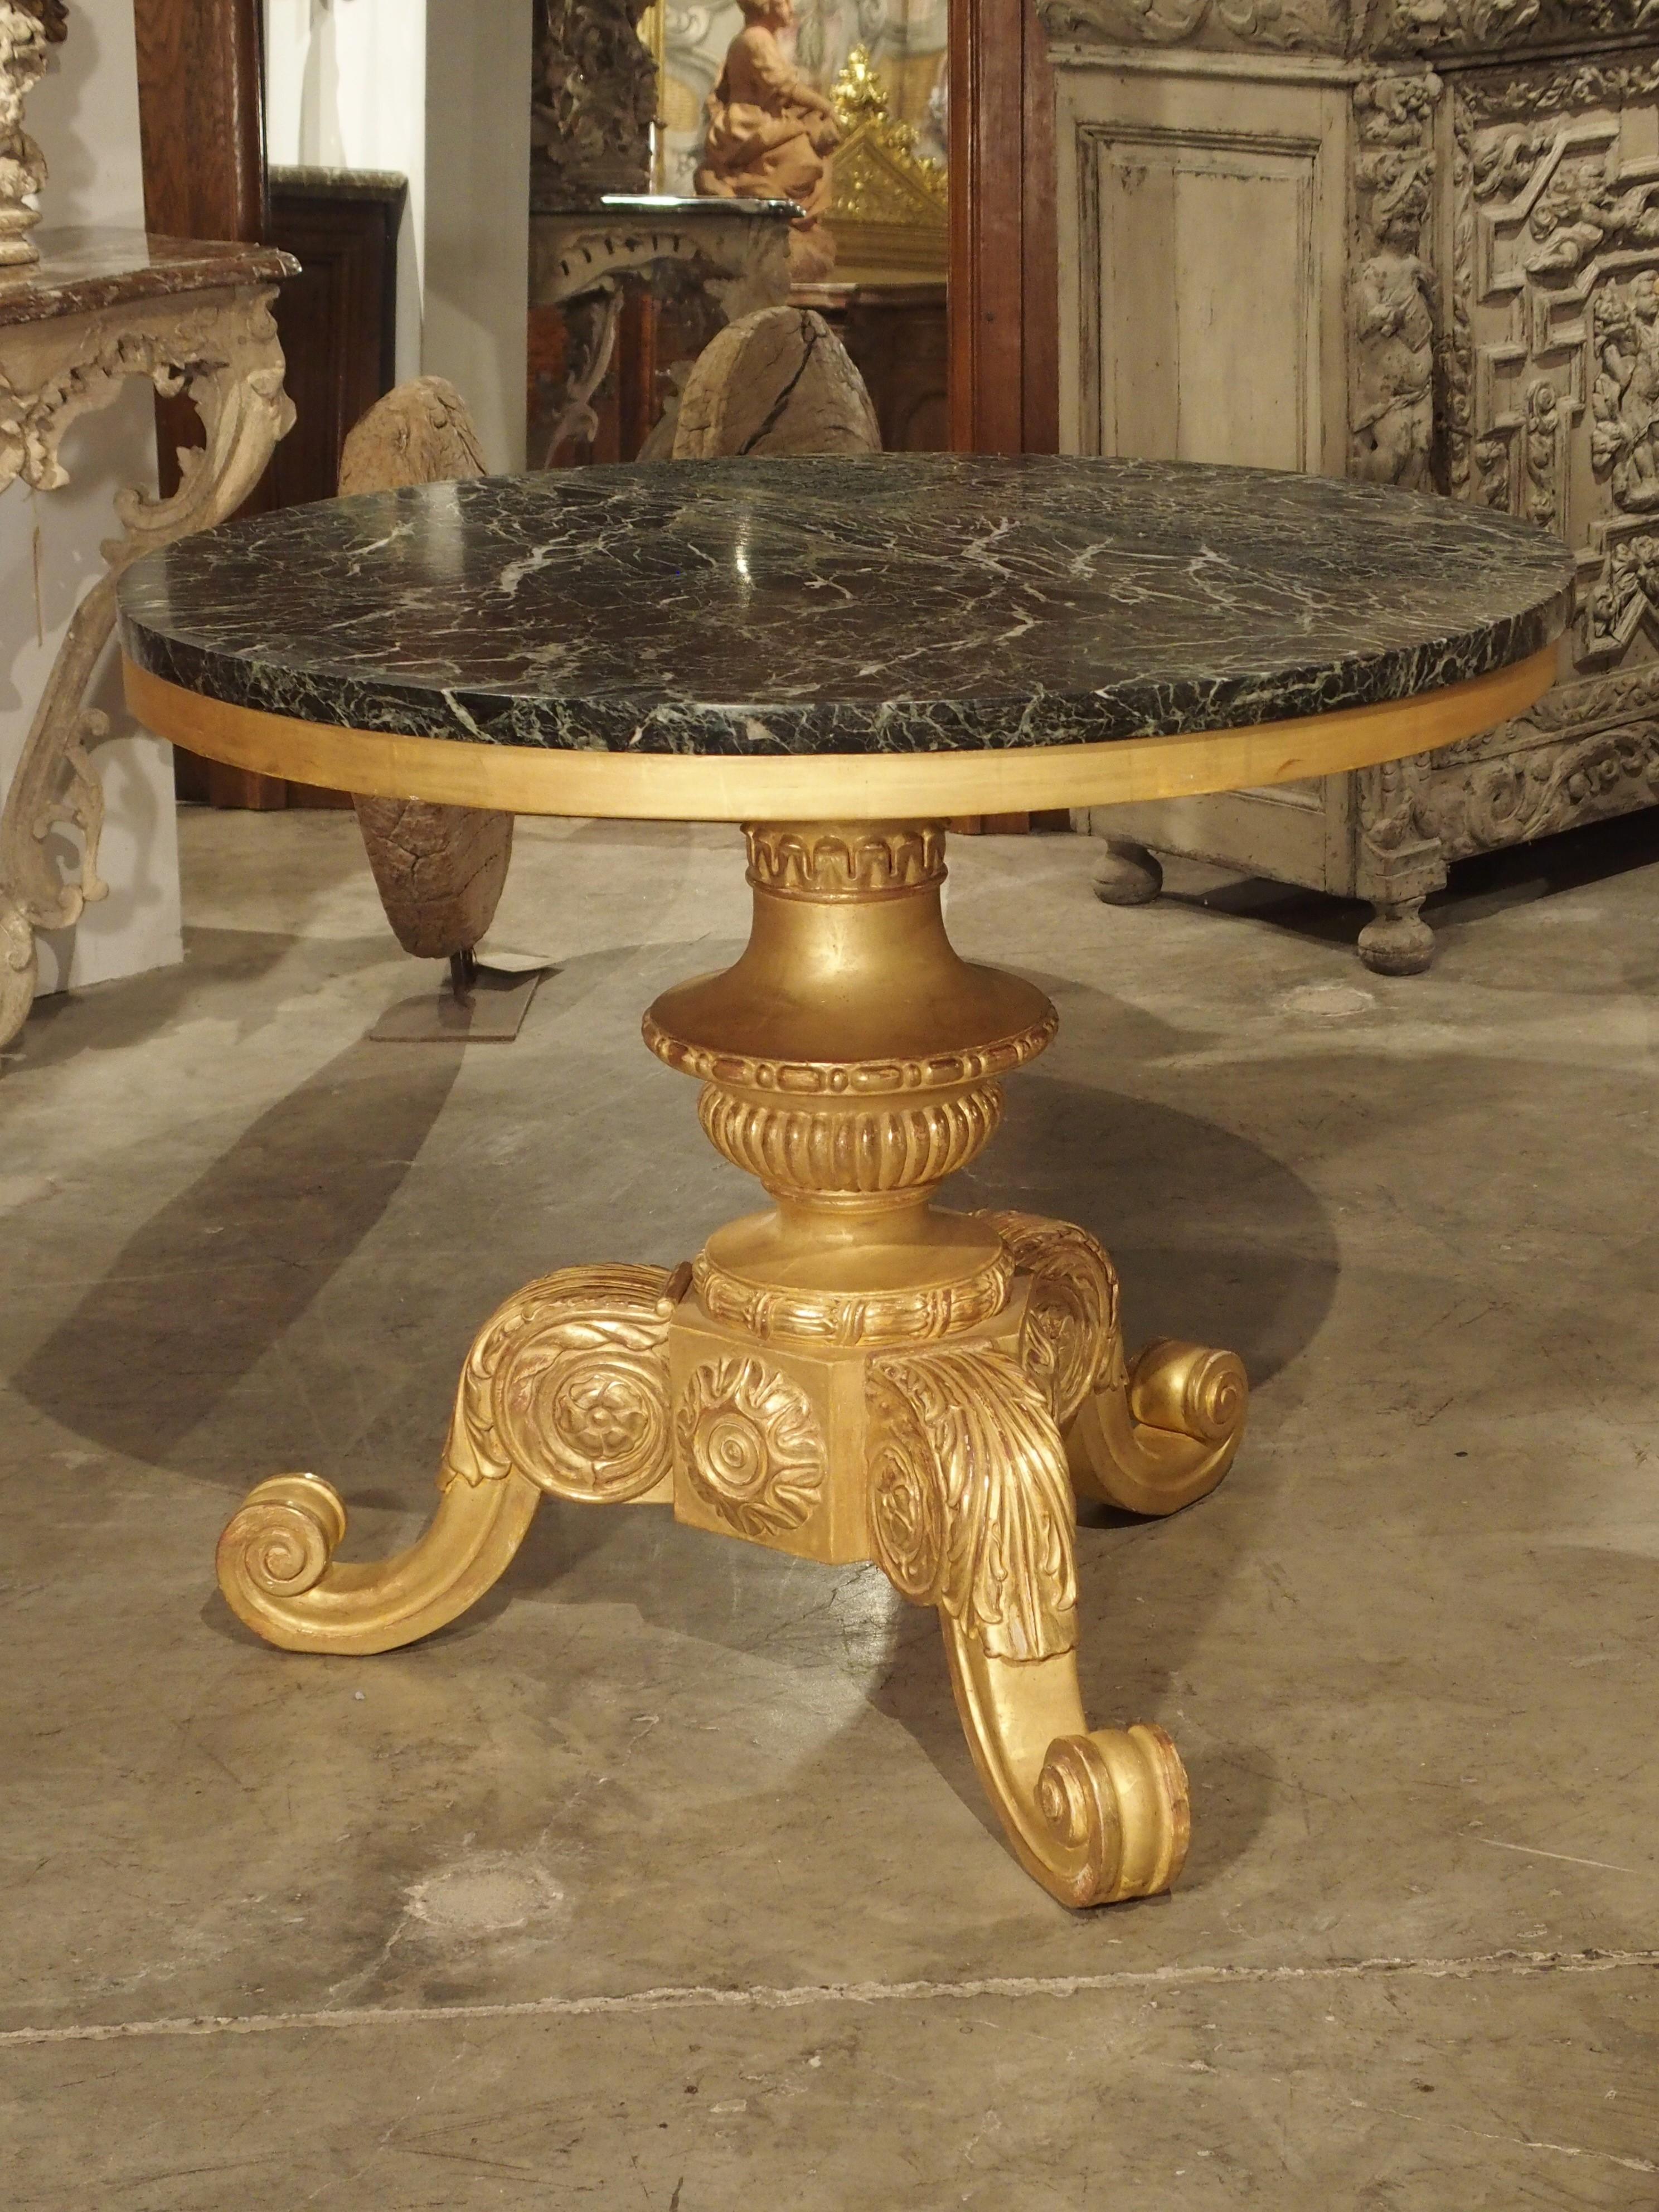 Napoleon III Circular Tripartite French Giltwood and Marble Center Table, Early 1900s